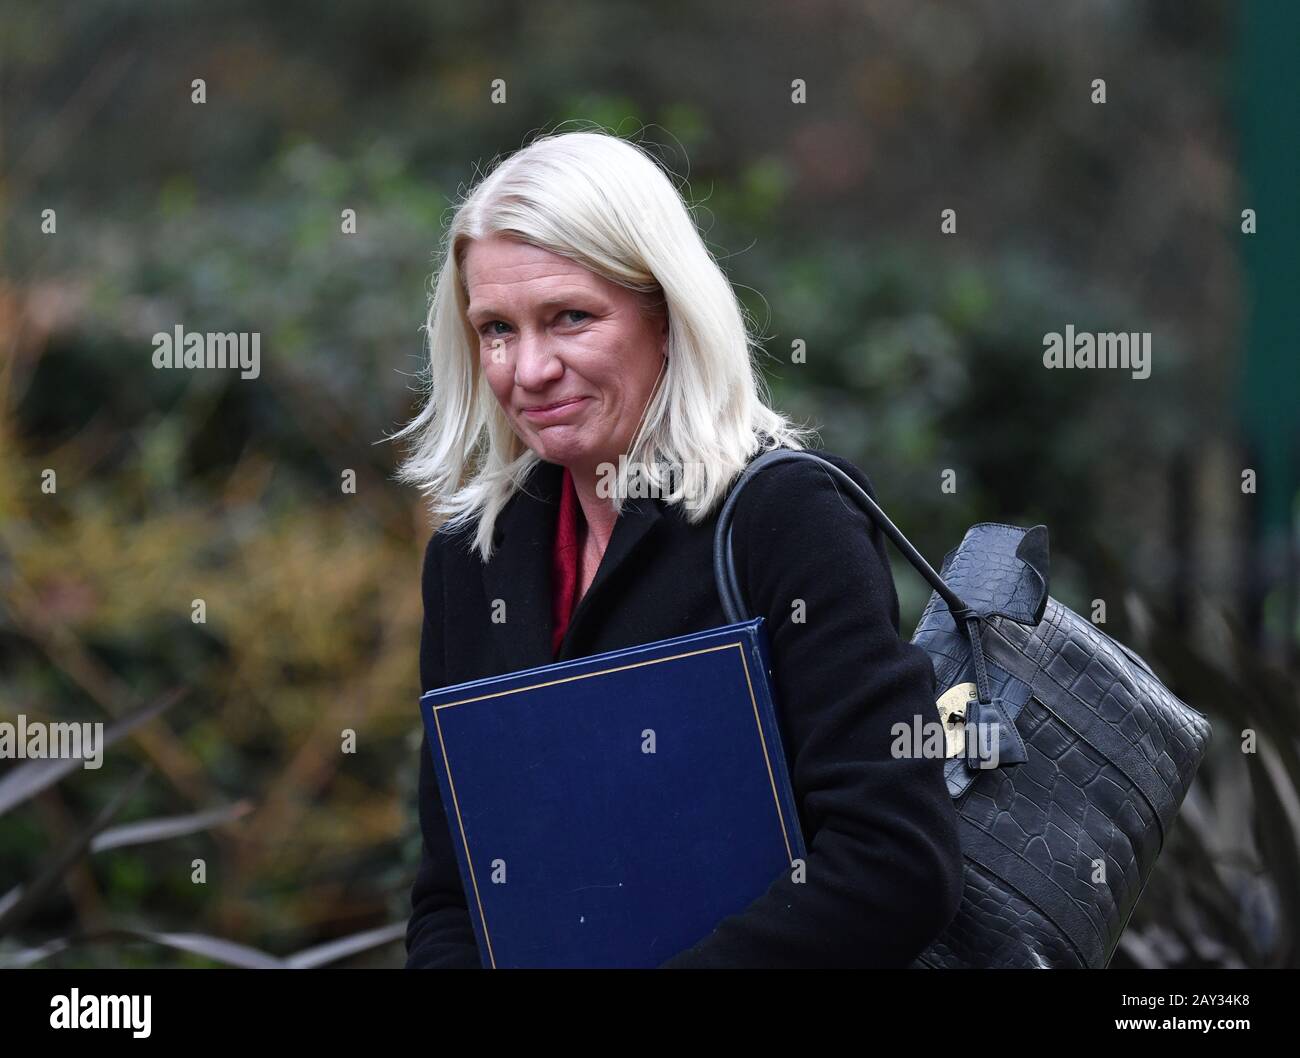 Downing Street, London, UK. 14th February 2020. Amanda Milling MP, Minister without Portfolio, Conservative Party Chairman, in Downing Street for weekly cabinet meeting. Credit: Malcolm Park/Alamy Live News. Stock Photo